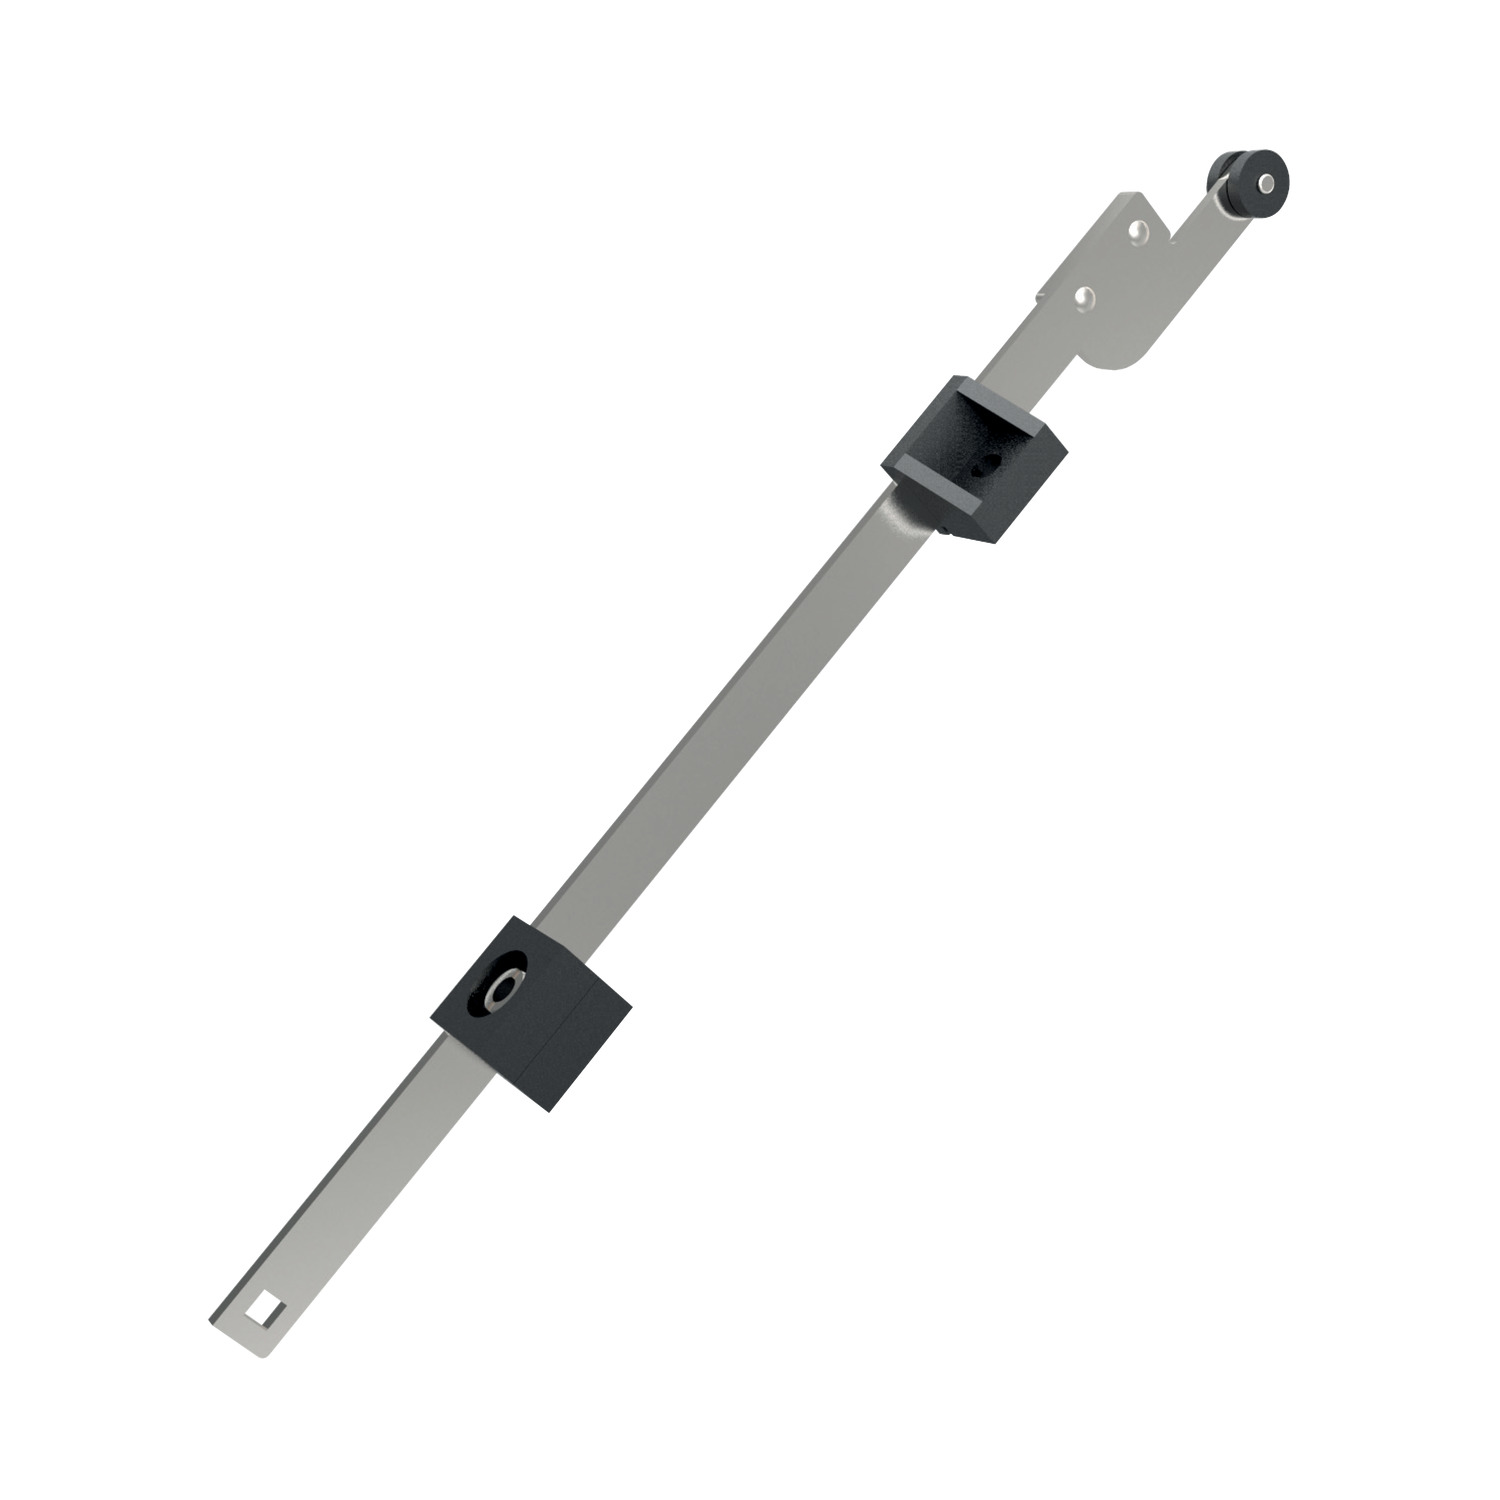 Multi-Point Latching Set Flat rod latching set for creating a 3-point system. Rods are made from zinc plated steel, with polyamide guides. Must be ordered seperately.